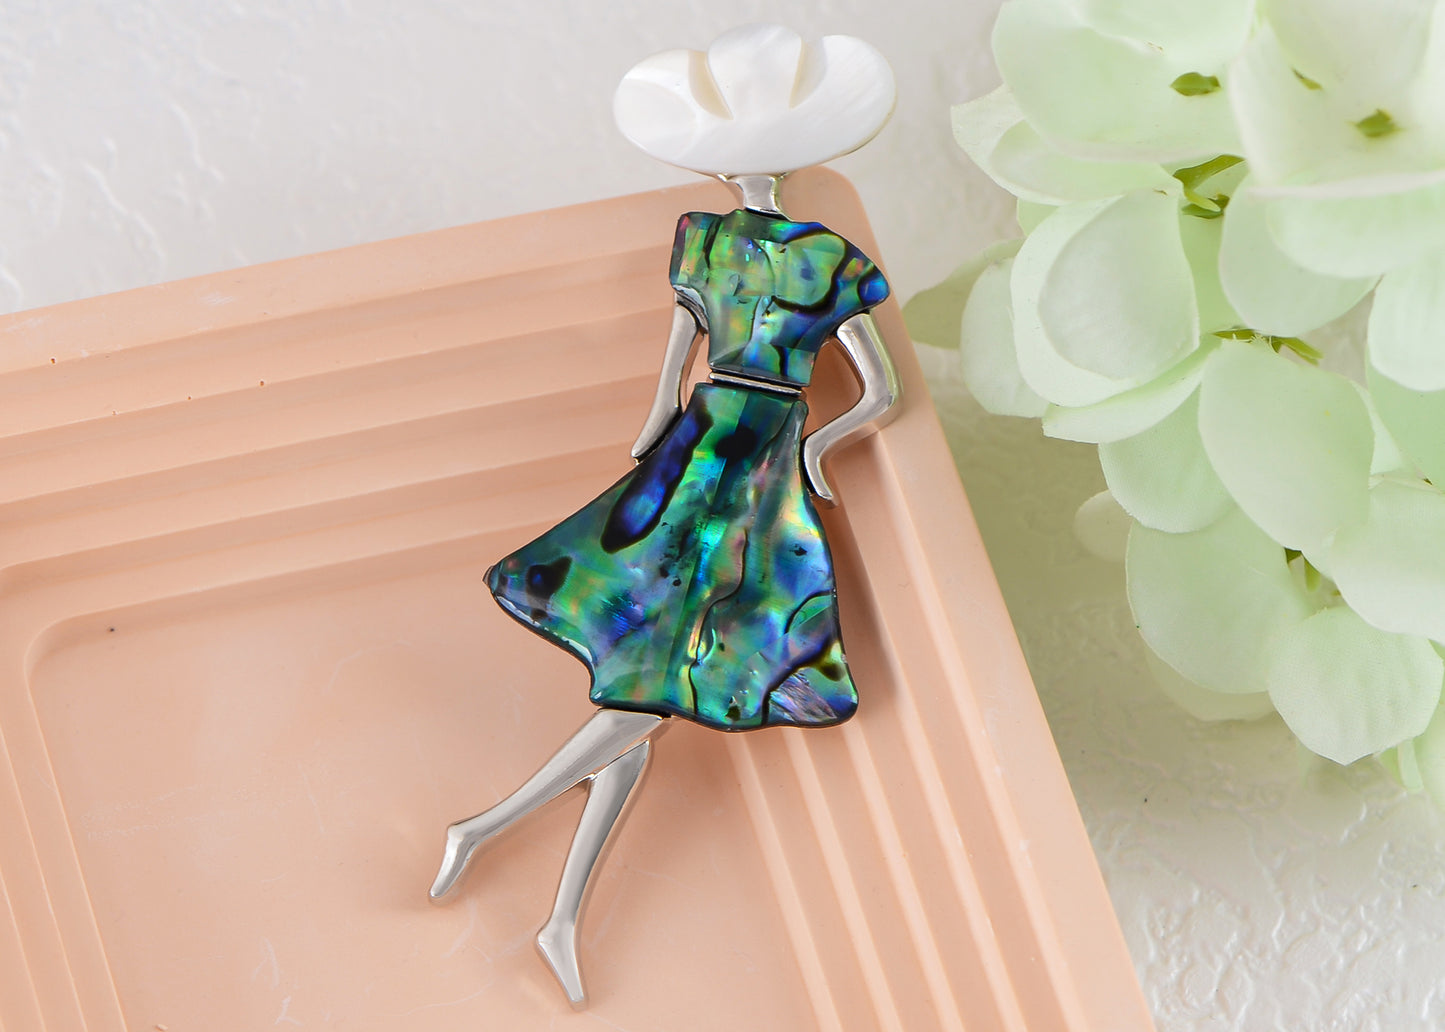 Alilang Silver Tone Abalone Shell Elegant Lady Women Dancer Brooch Pin for Wedding Birthday Party